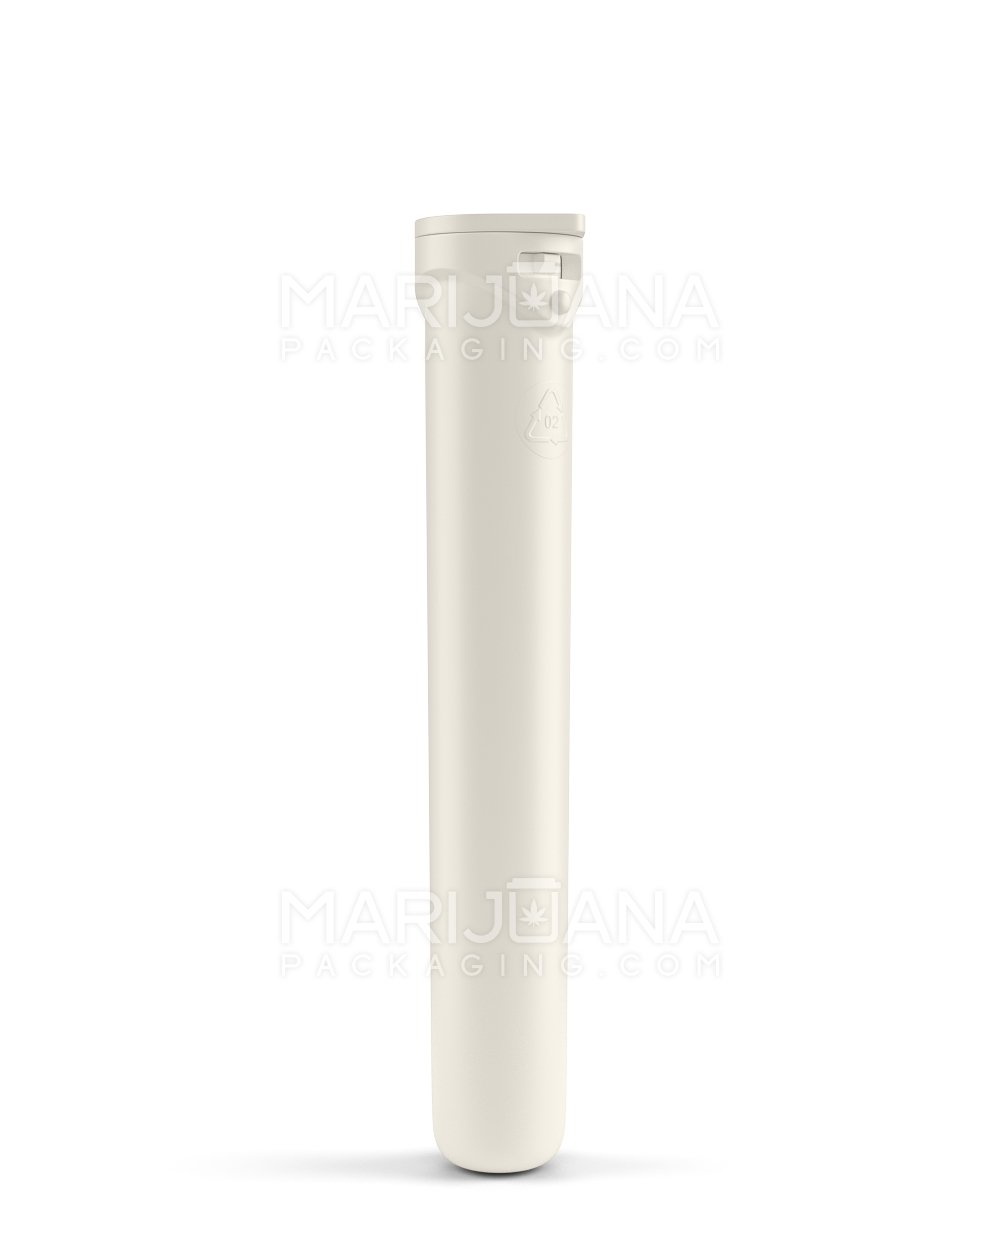 Child Resistant & Sustainable | 100% Recyclable "Line-up Arrow" Reclaimed Ocean Plastic Pre-Roll Tubes | 110mm - Beige - 1